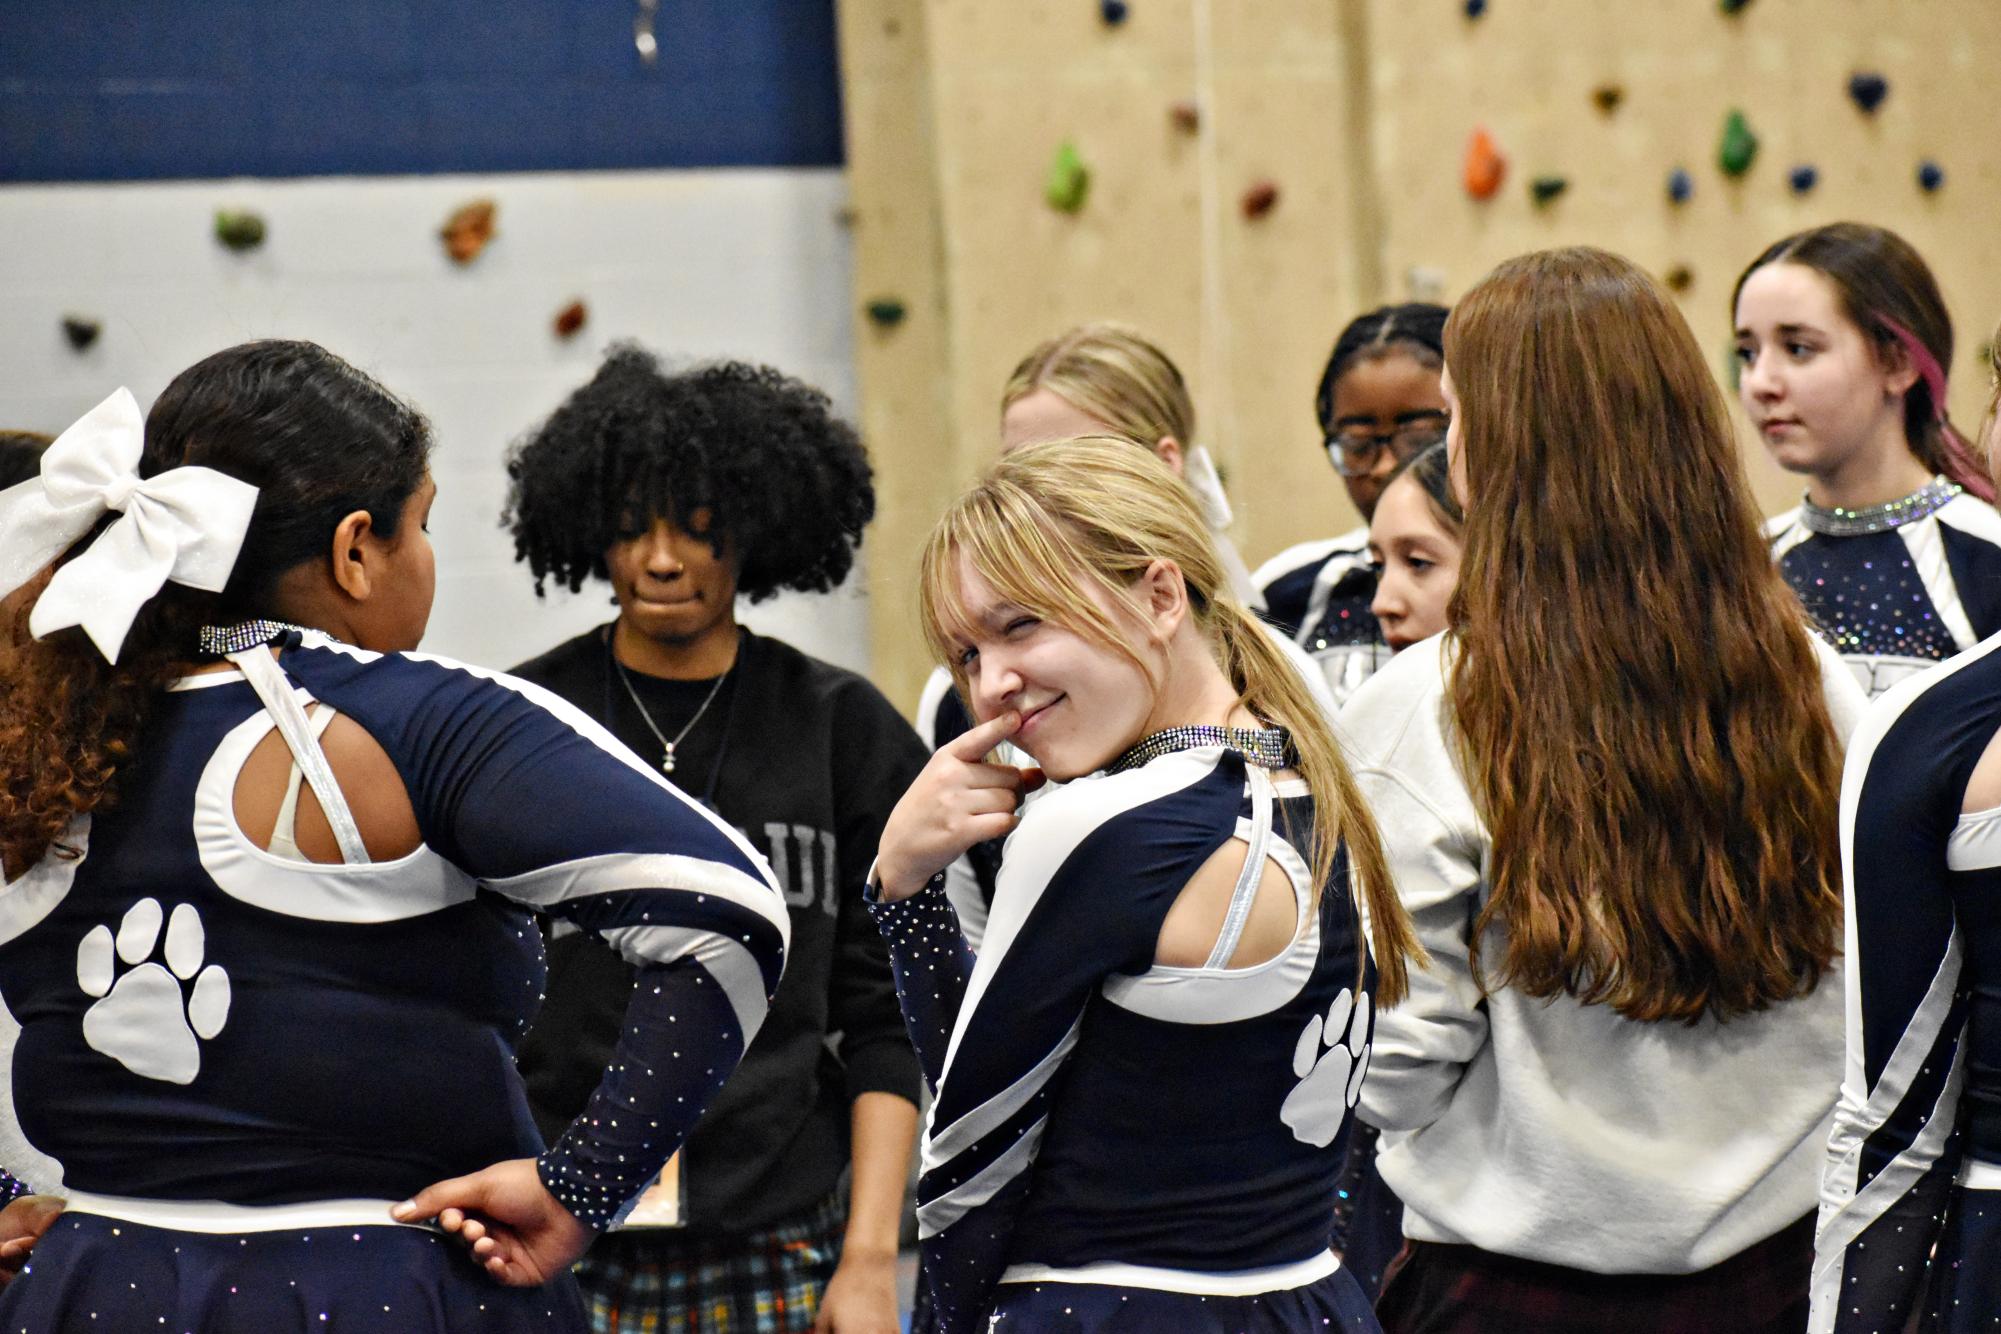 Sophomore Avery Unger seems to be in on the secret as the cheer team strategizes ahead of its next competition.